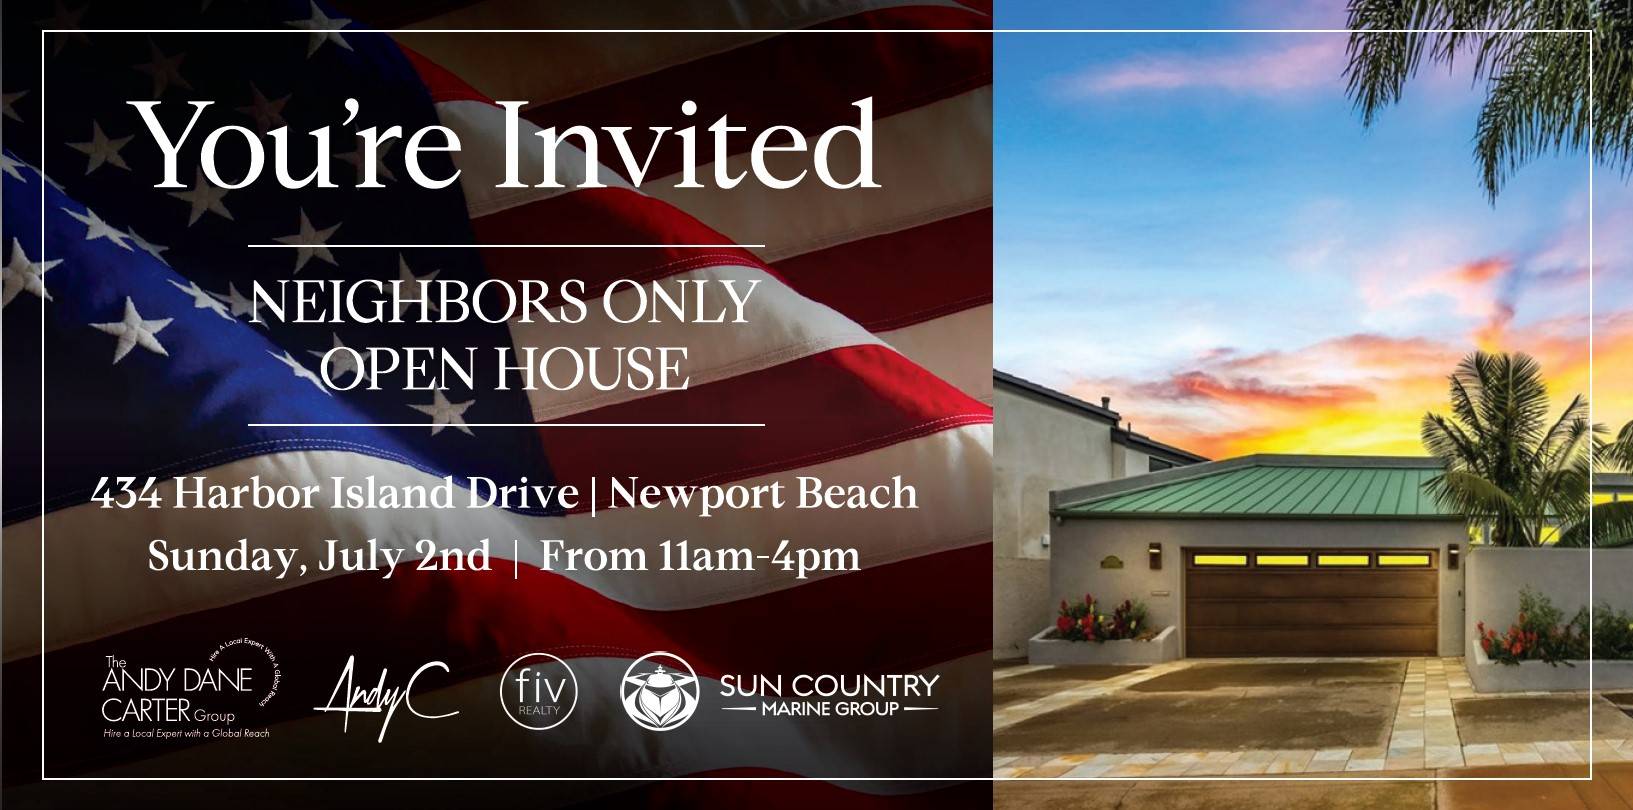 Neighbors Only OPEN HOUSE presented by the Andy Dane Carter Group